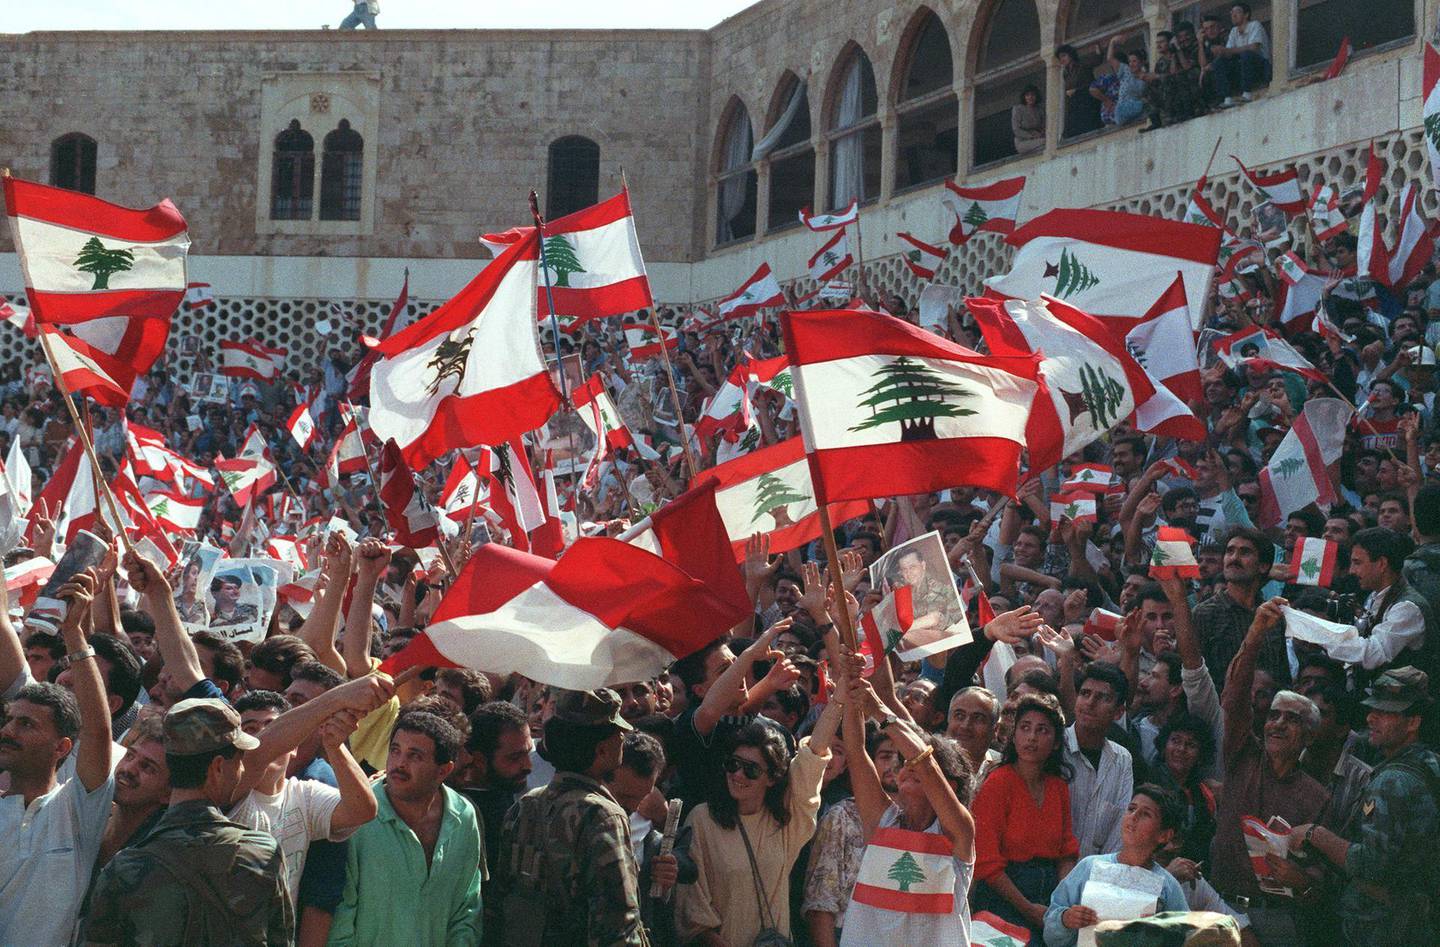 Christian Lebanese people wave national flags and portraits of General Aoun while they stage a protest 04 November 1989 in front of Baabda presidential palace in East Beirut against agreement reached in October by deputies and the Arab League Committee in Taif.  After a month of intense discussion, in October 1989, the deputies informally agreed on a charter of national reconciliation, also known as Taif agreement. General Aoun, claiming powers as interim Prime Minister, issued a decree in early November dissolving the parliament and did not accept the ratification of the Taif agreement. The Lebanese civil war broken out in April 1975. AFP PHOTO JOSEPH BARRAK (Photo by JOSEPH BARRAK / AFP)